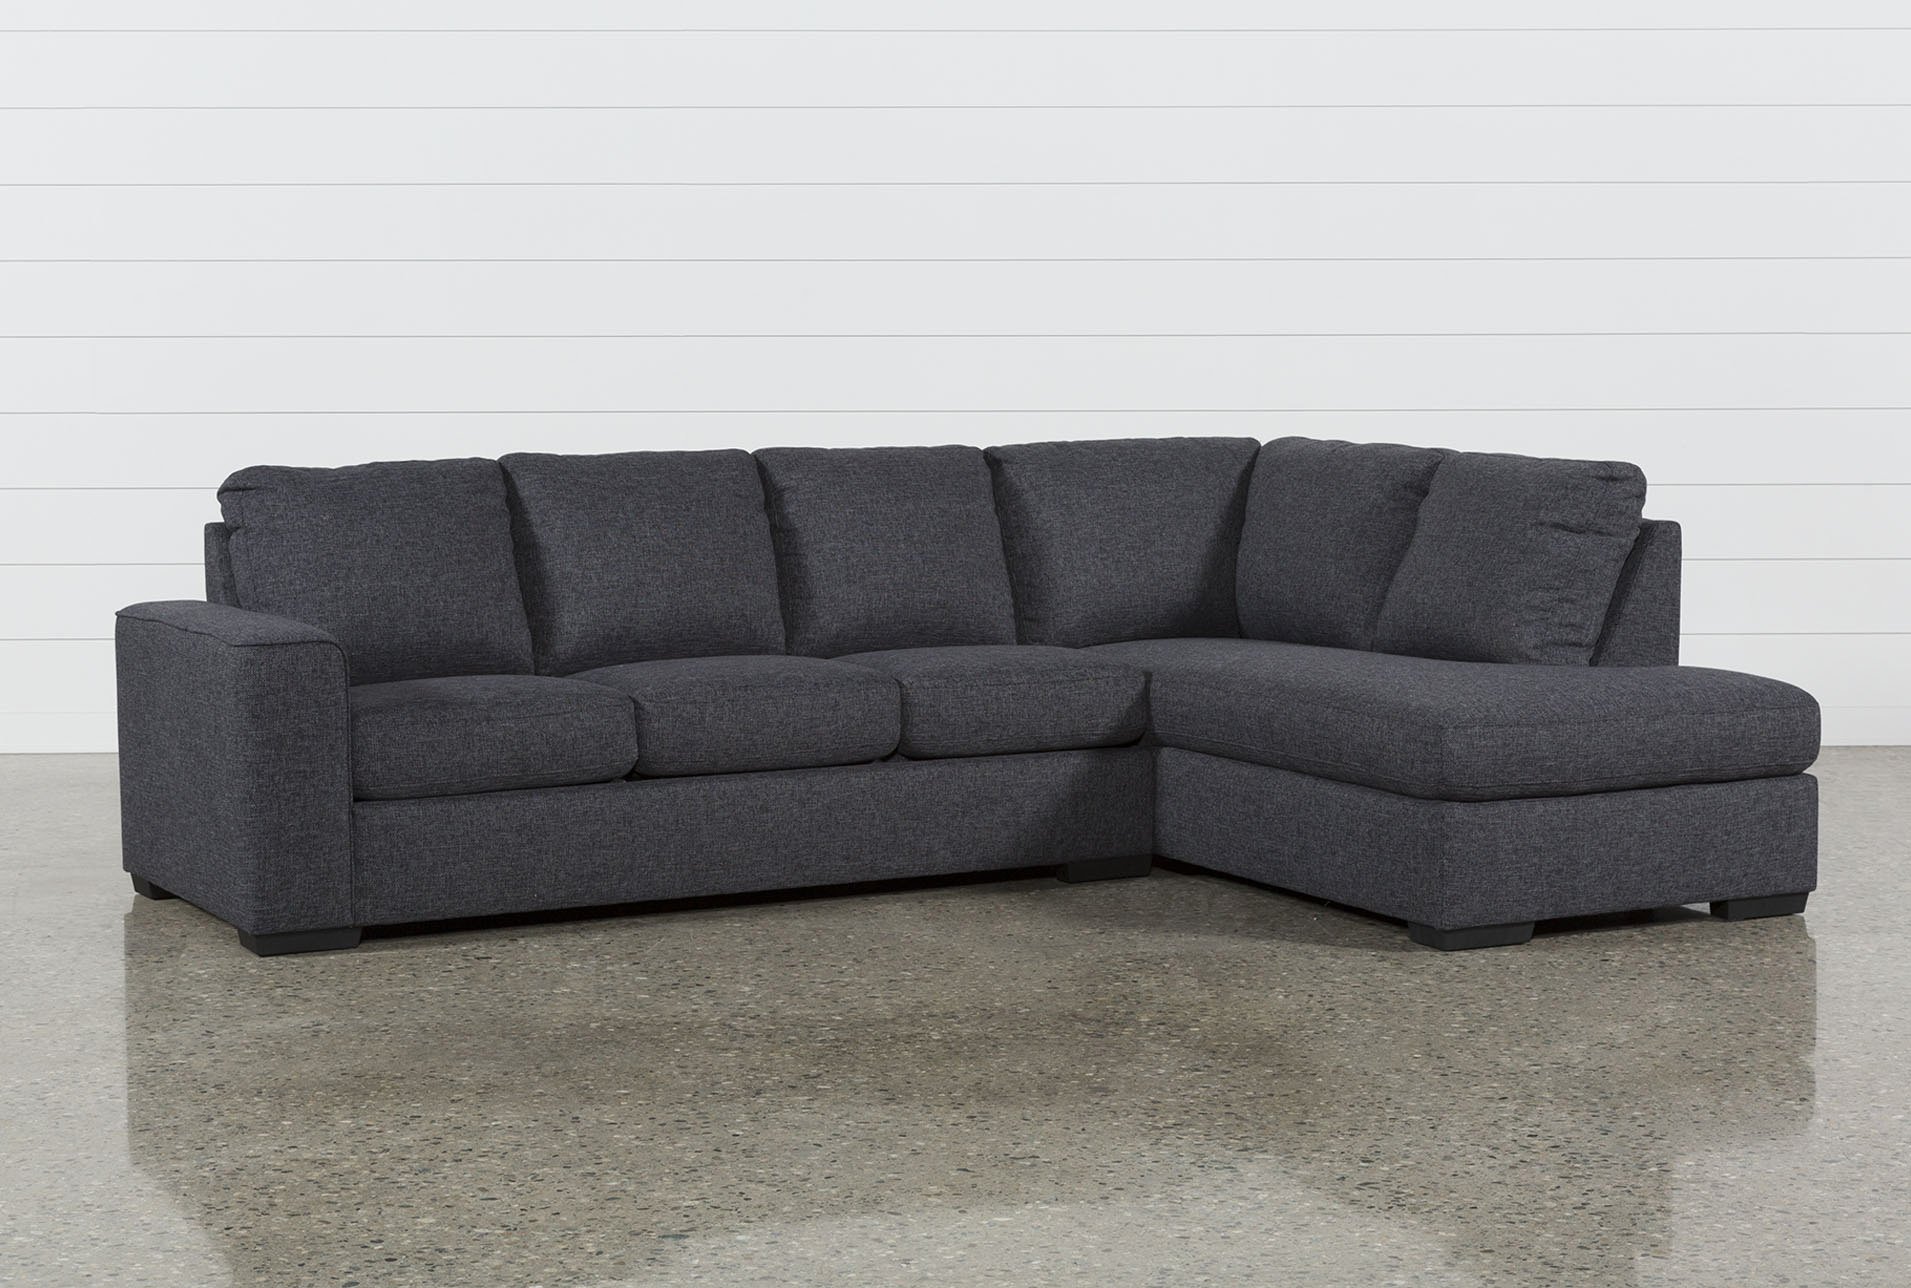 Enjoy the luxury and relaxing
feel of comfort using a sectional sleeper sofa